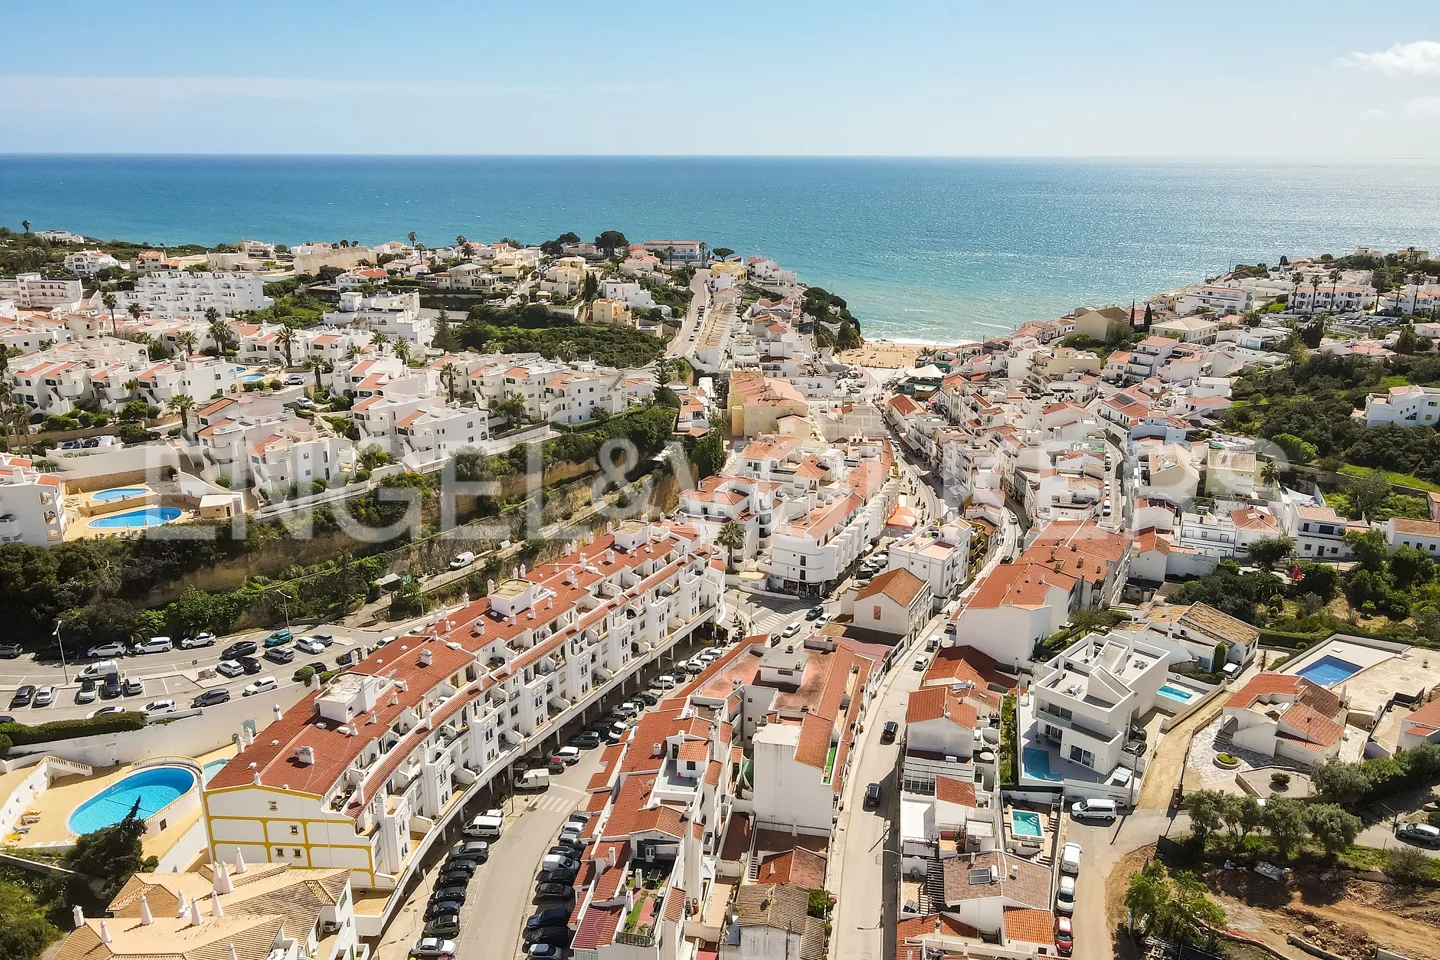 2-bedroom apartment in the center of Carvoeiro, 400m from the beach